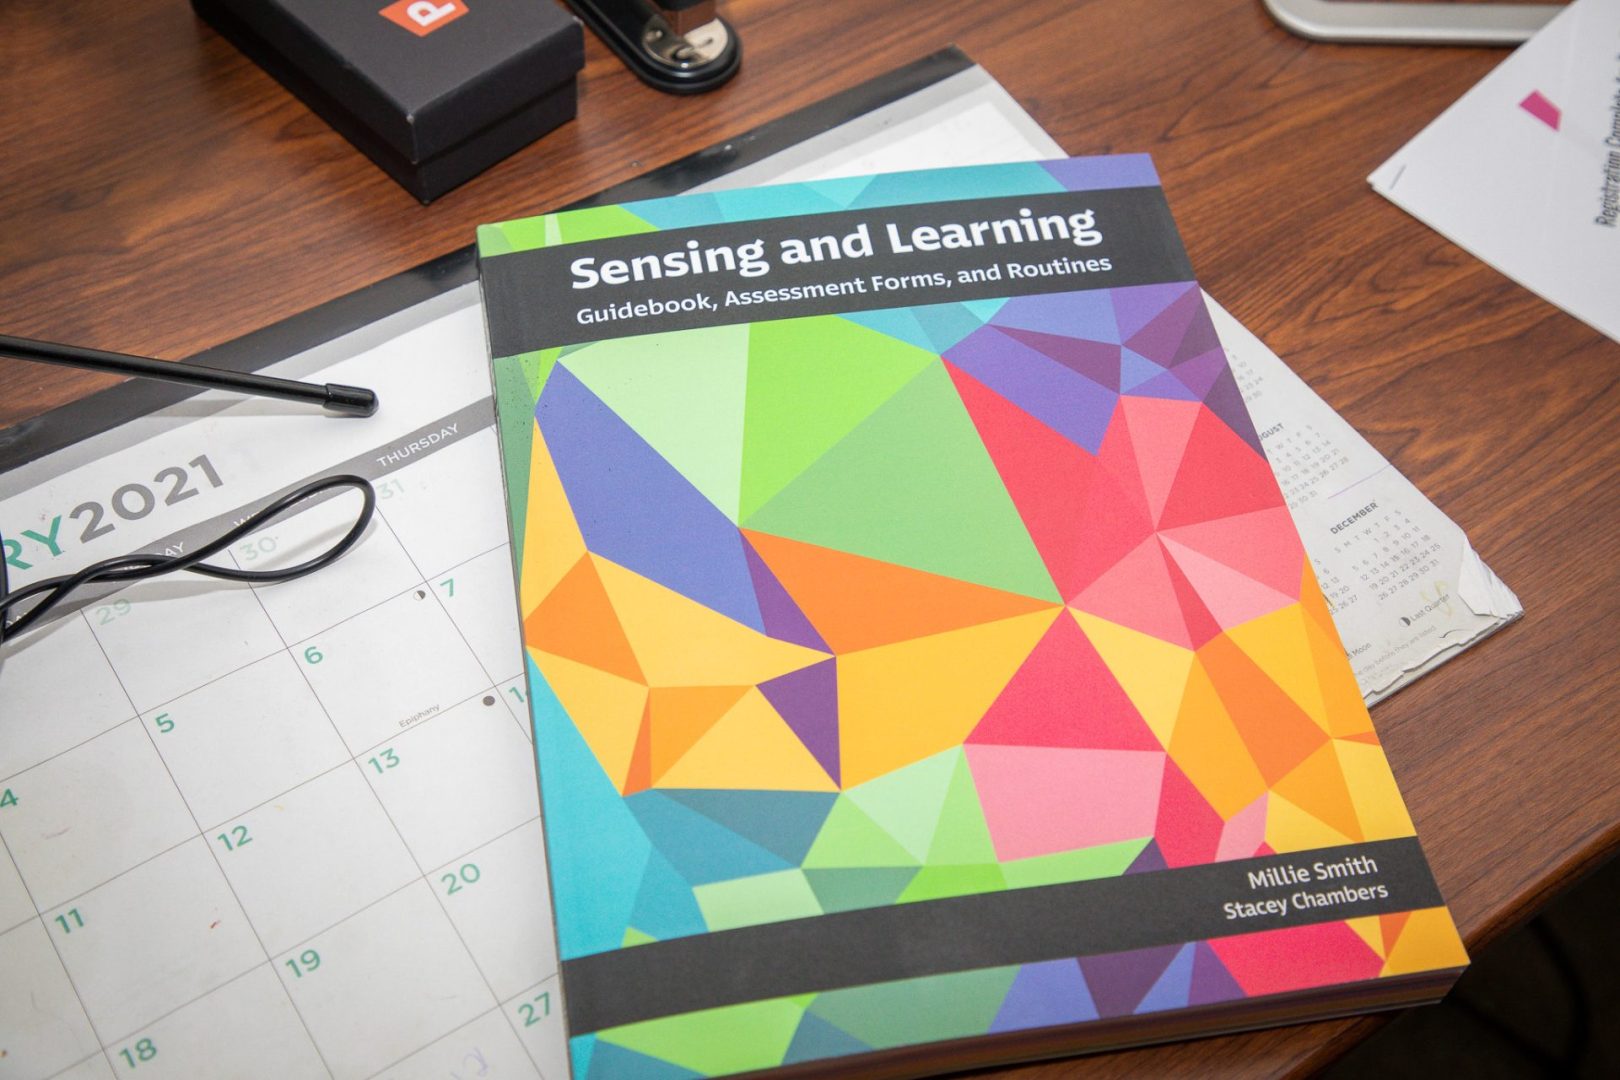 A copy of Sensing and Learning lays on a wooden desk on top of a desk calendar and beside some office supplies.